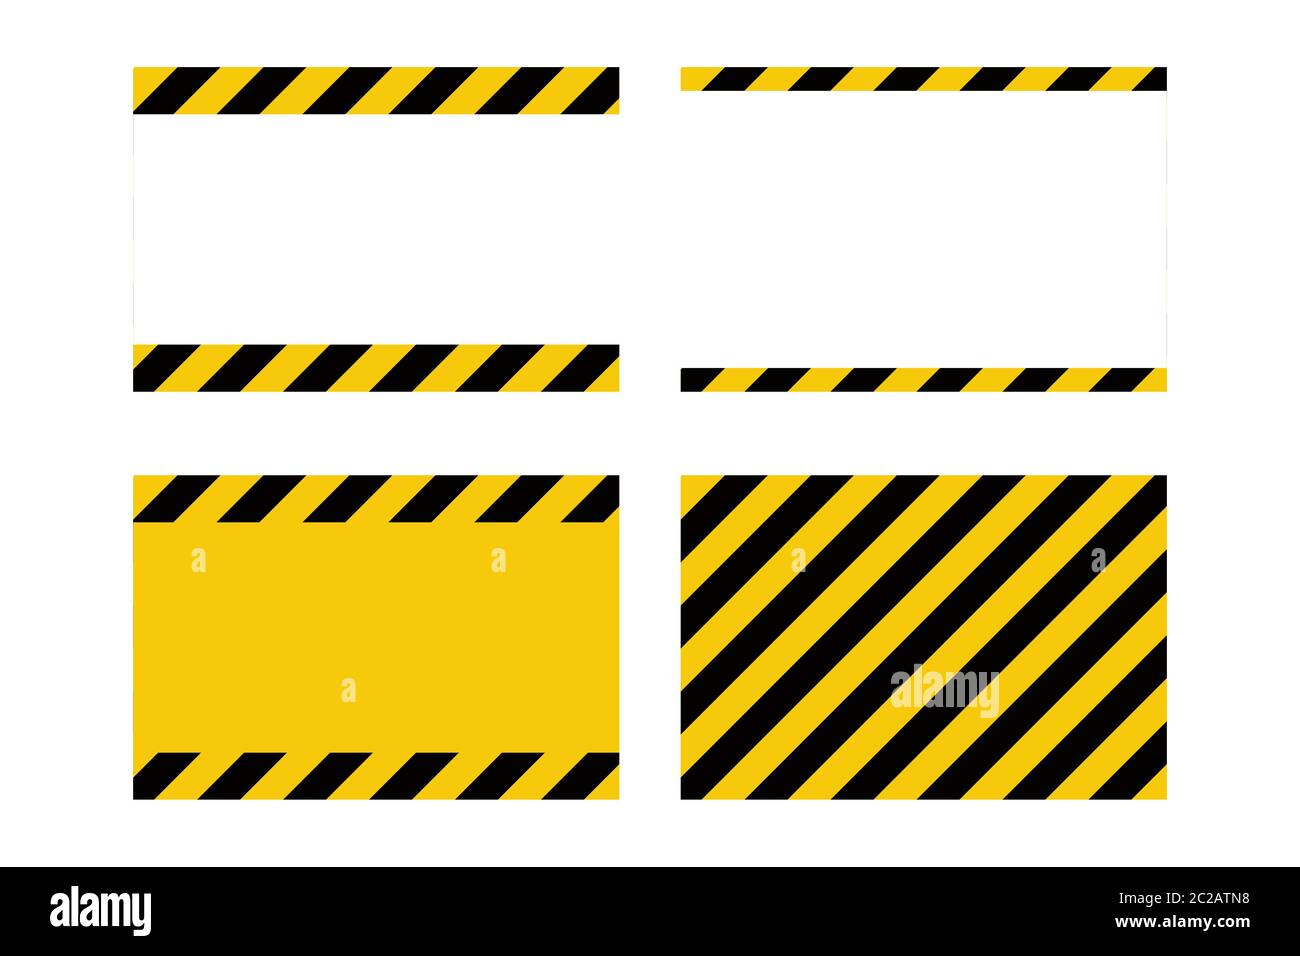 Black and yellow line striped background. Caution tape Stock Vector